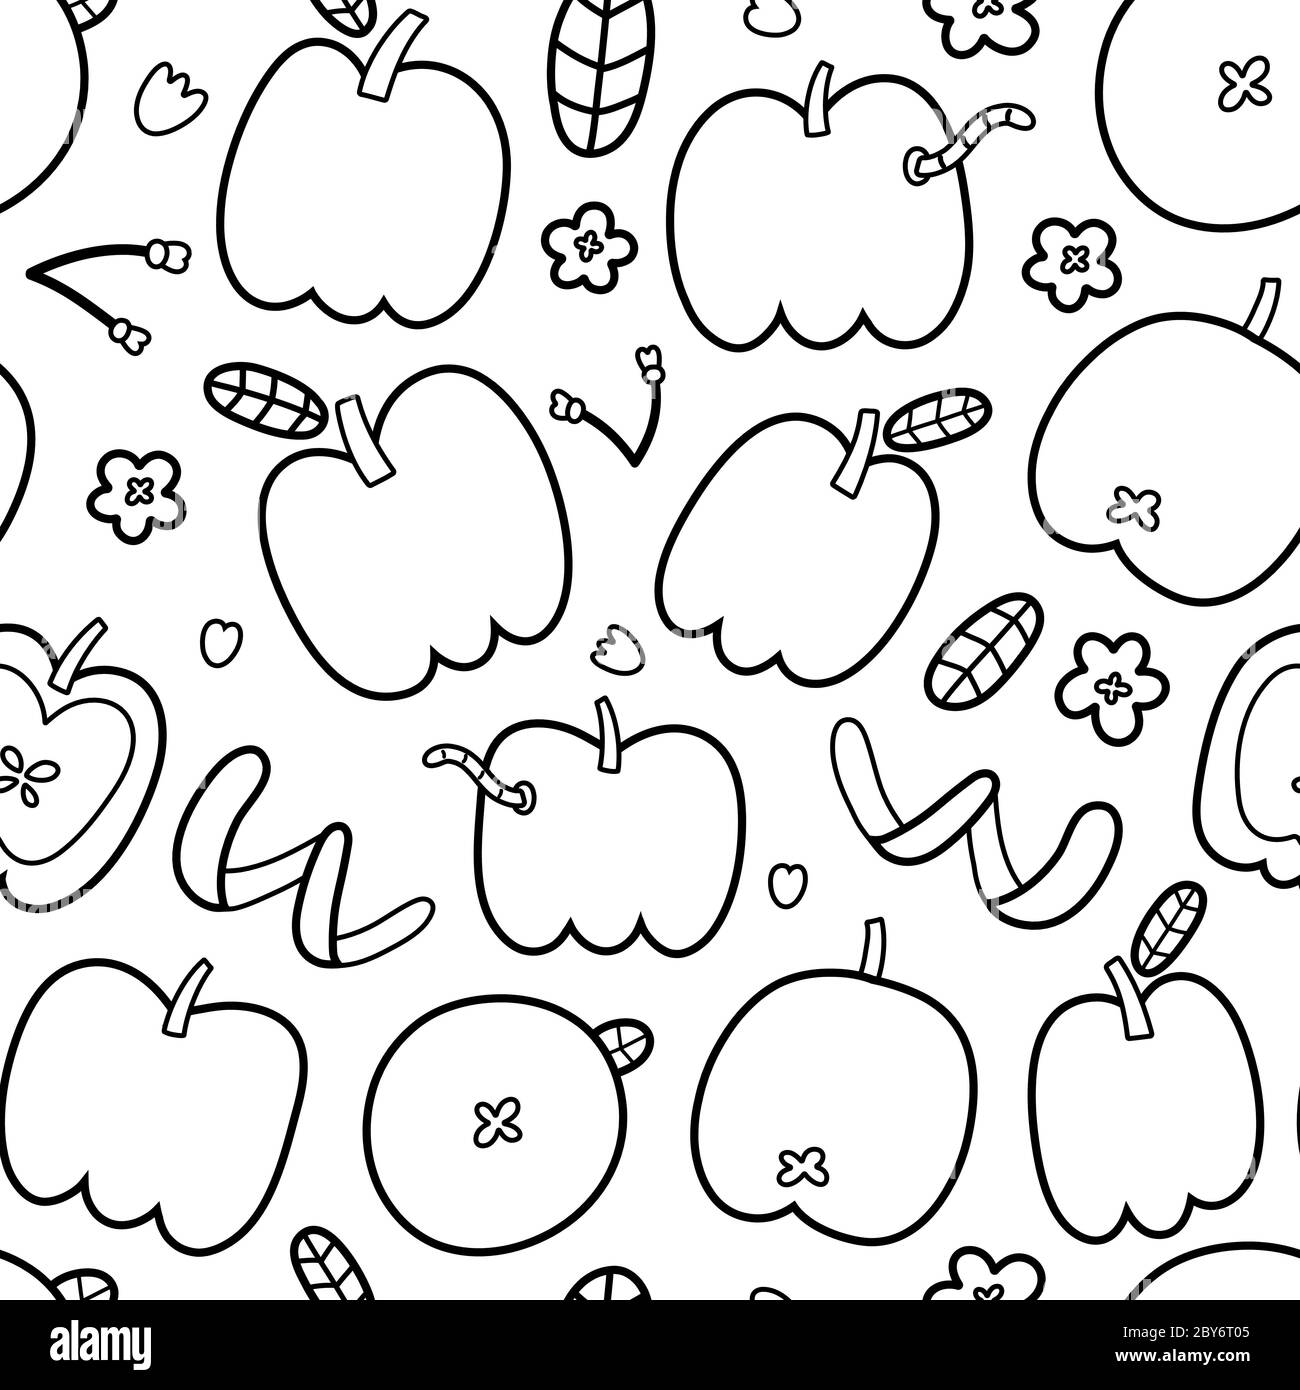 Doodle apple pattern, trendy outline drawing, seamless vector ornament, black and white line art drawing, cute apples and leaves and blooming flowers Stock Vector